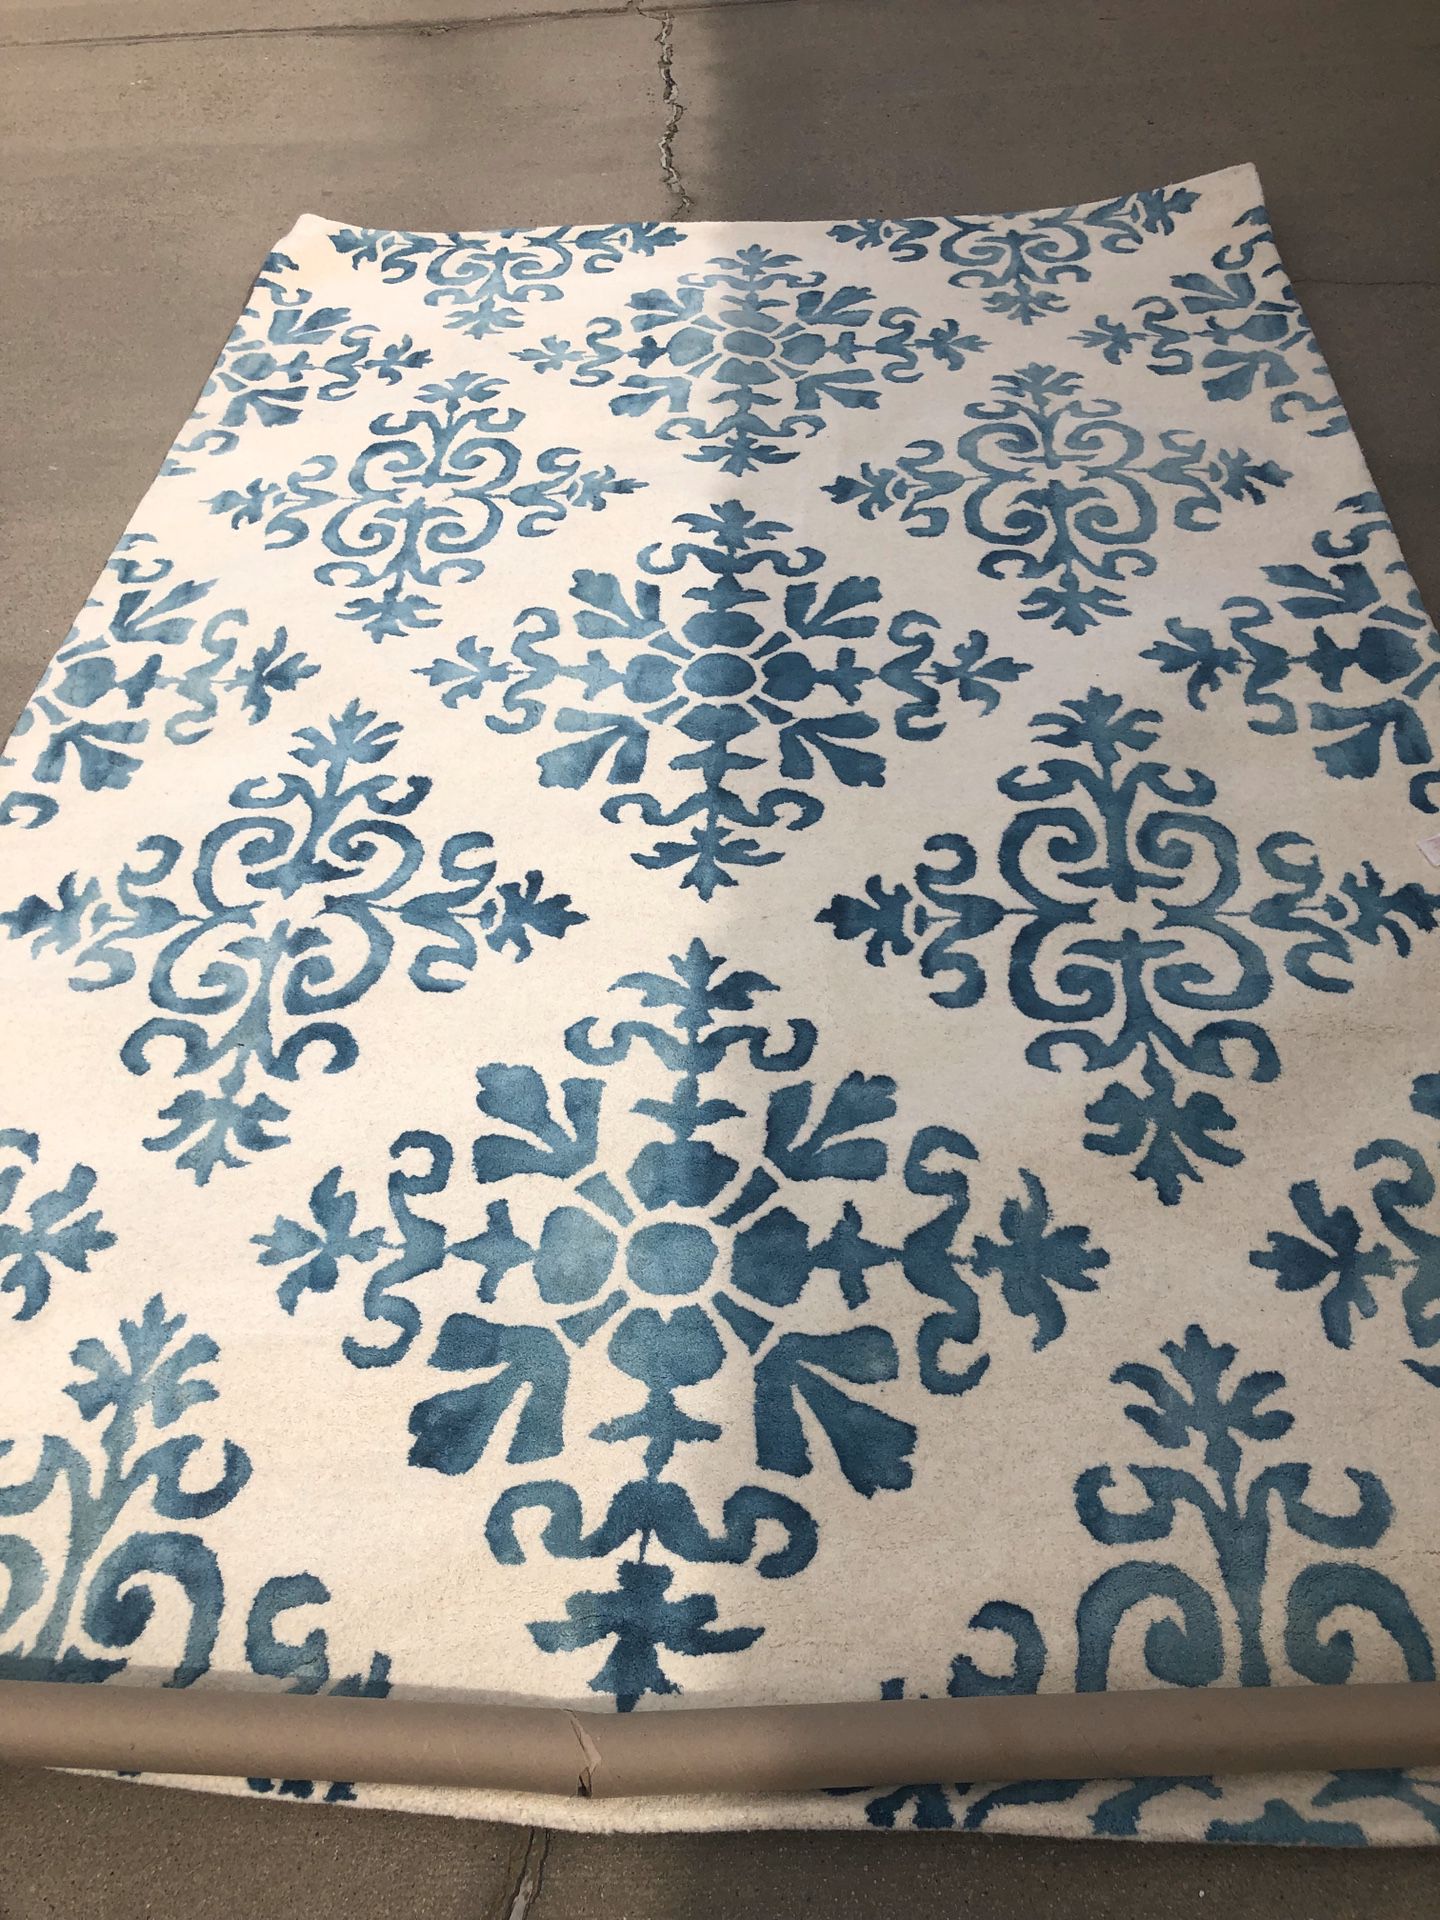 Brand new wool contemporary area rug. Retails for over $350